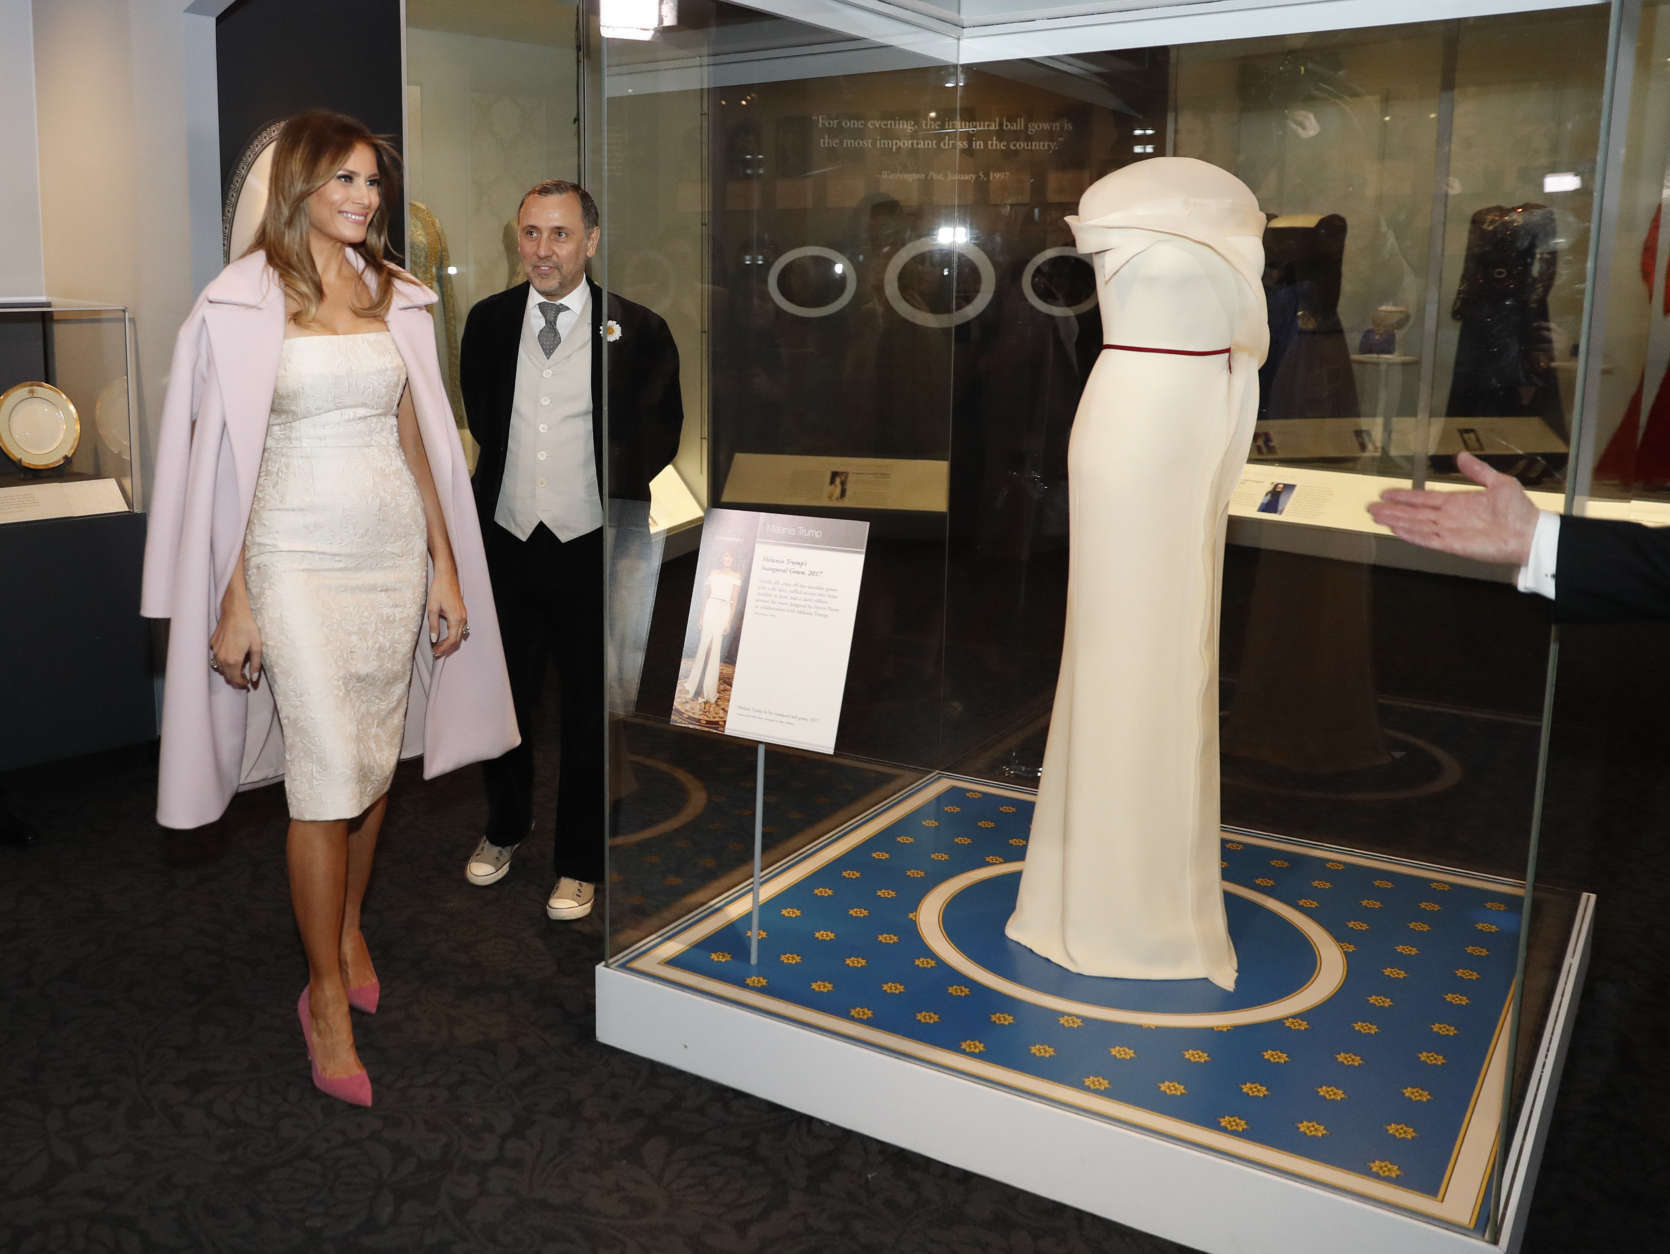 First lady Melania Trump donates her inaugural gown, designed by Hervé Pierre, center, to the First Ladies' Collection at the Smithsonian's National Museum of American History, during a ceremony in Washington, Friday, Oct. 20, 2017. (AP Photo/Pablo Martinez Monsivais)